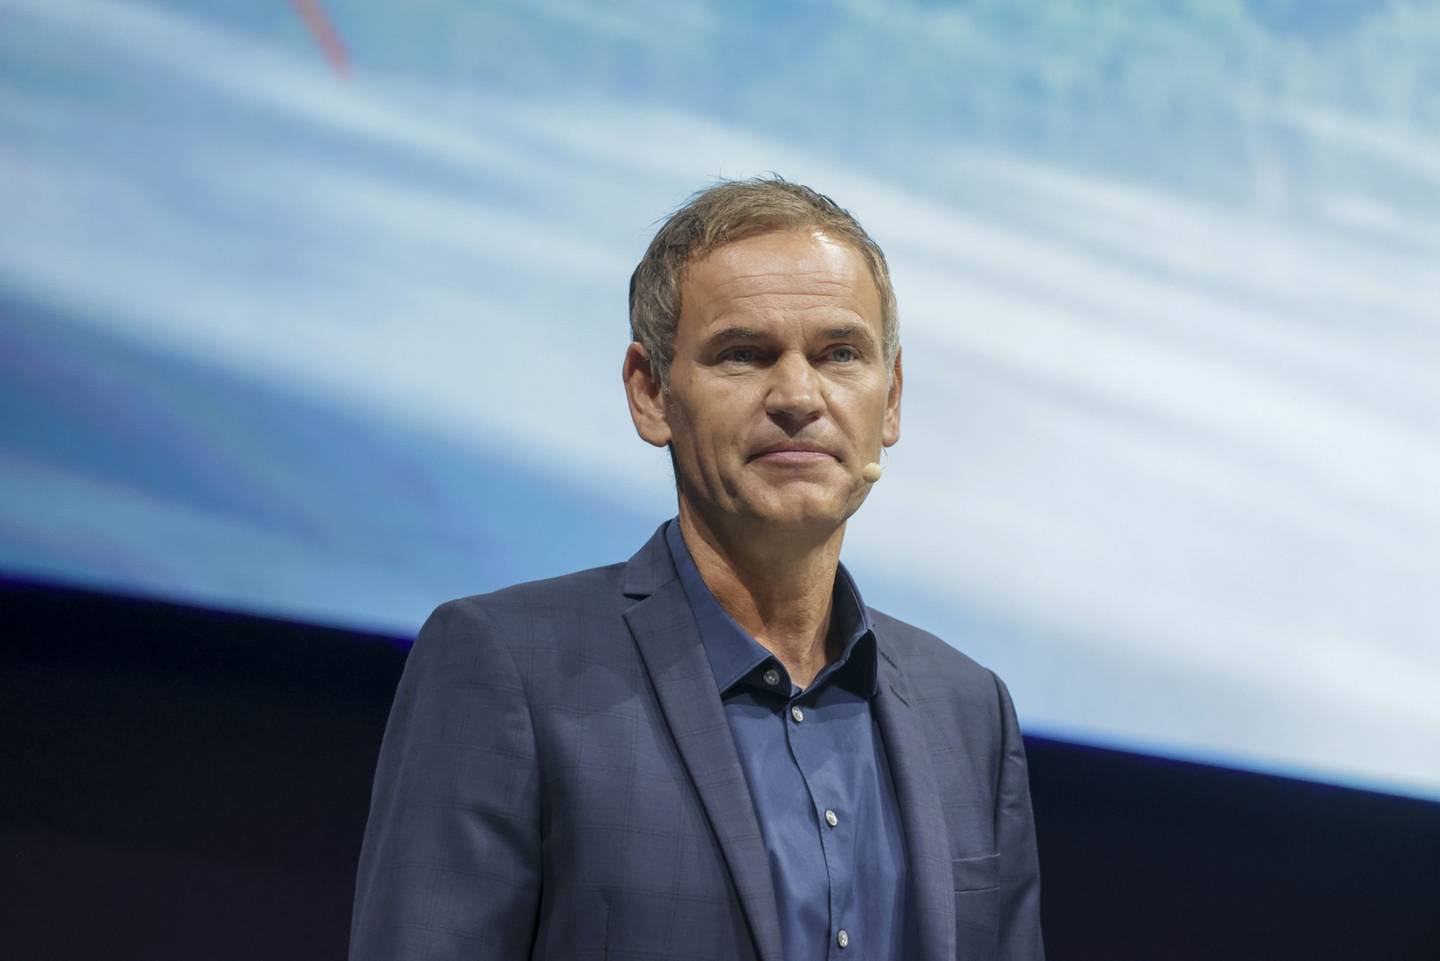 Oliver Blume, chief executive officer of Porsche AG, during a keynote speech at the IAA Munich Motor Show in Munich, Germany, on Tuesday, Sept. 7, 2021. The IAA, taking place in Munich for the first time, is the first in-person major European car show since the Coronavirus pandemic started.dfd